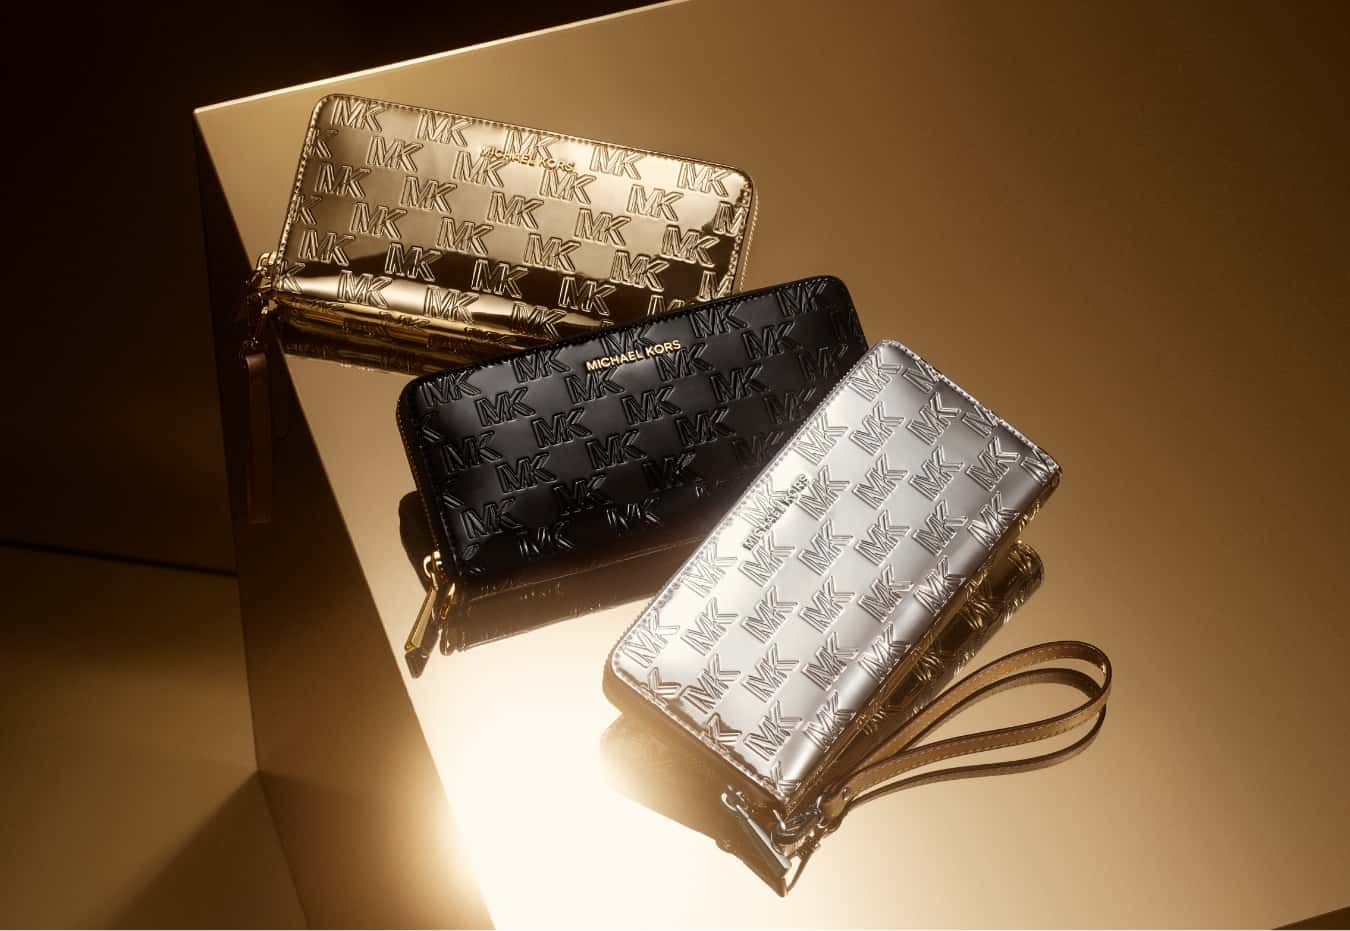 Bag These New Arrivals from Michael Kors